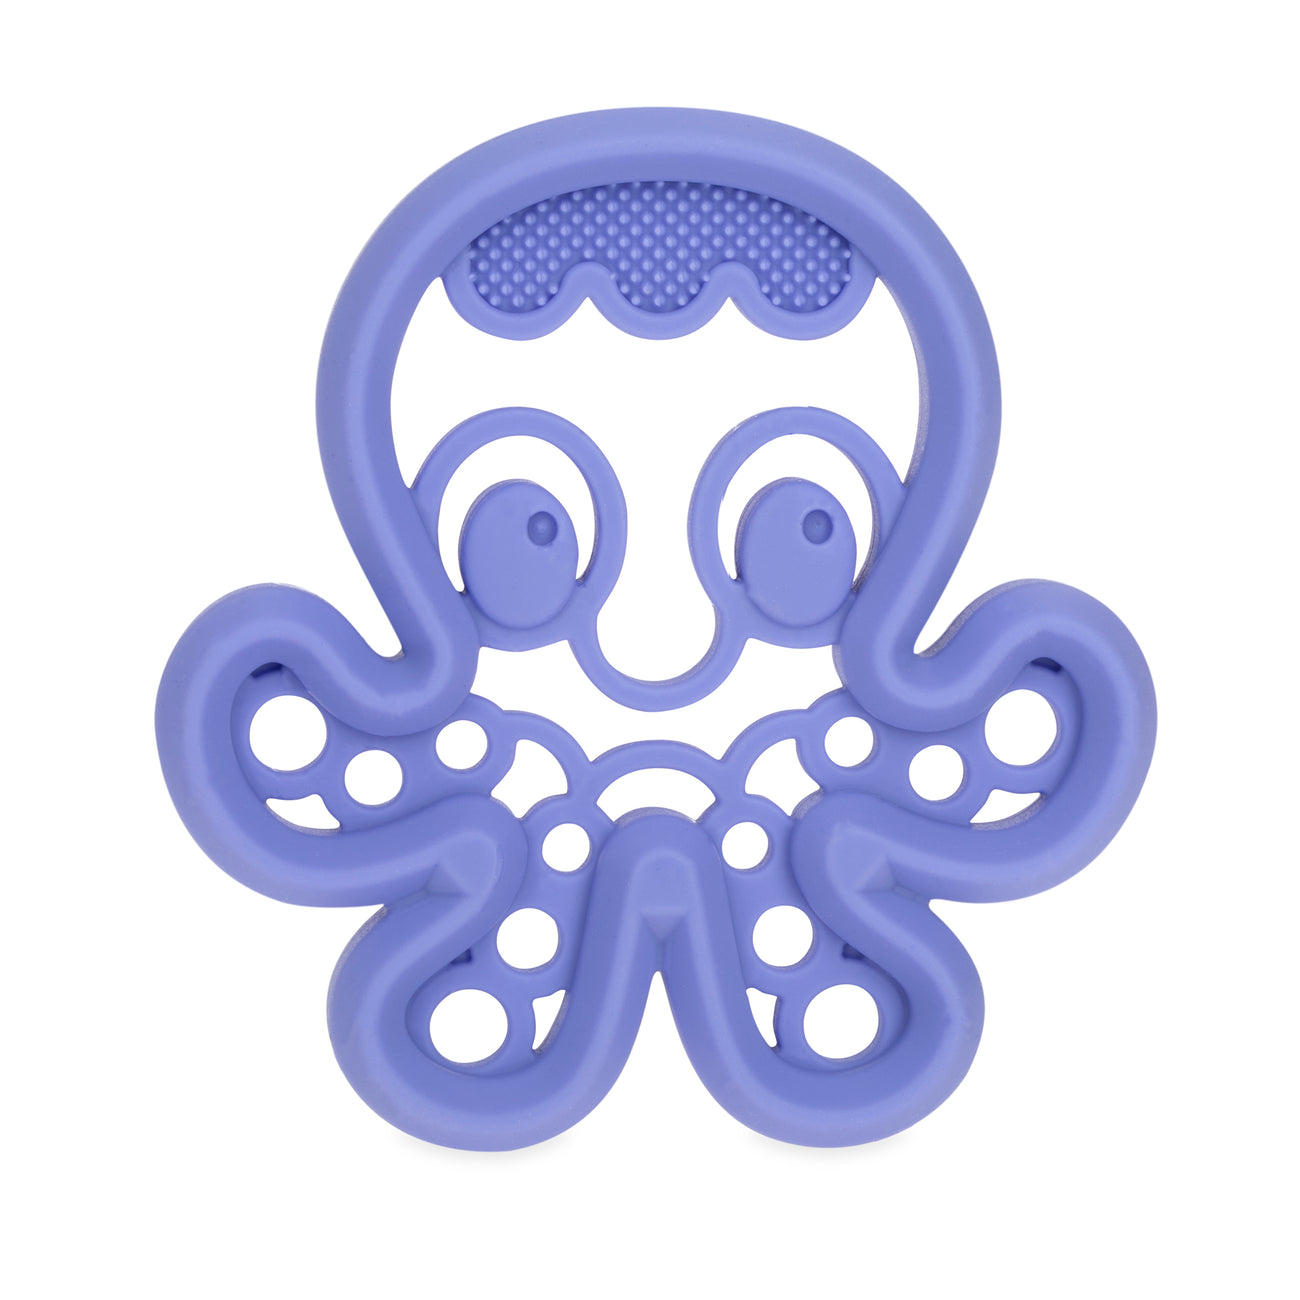 Soft Silicone Gum Massaging Teether - Nuby US